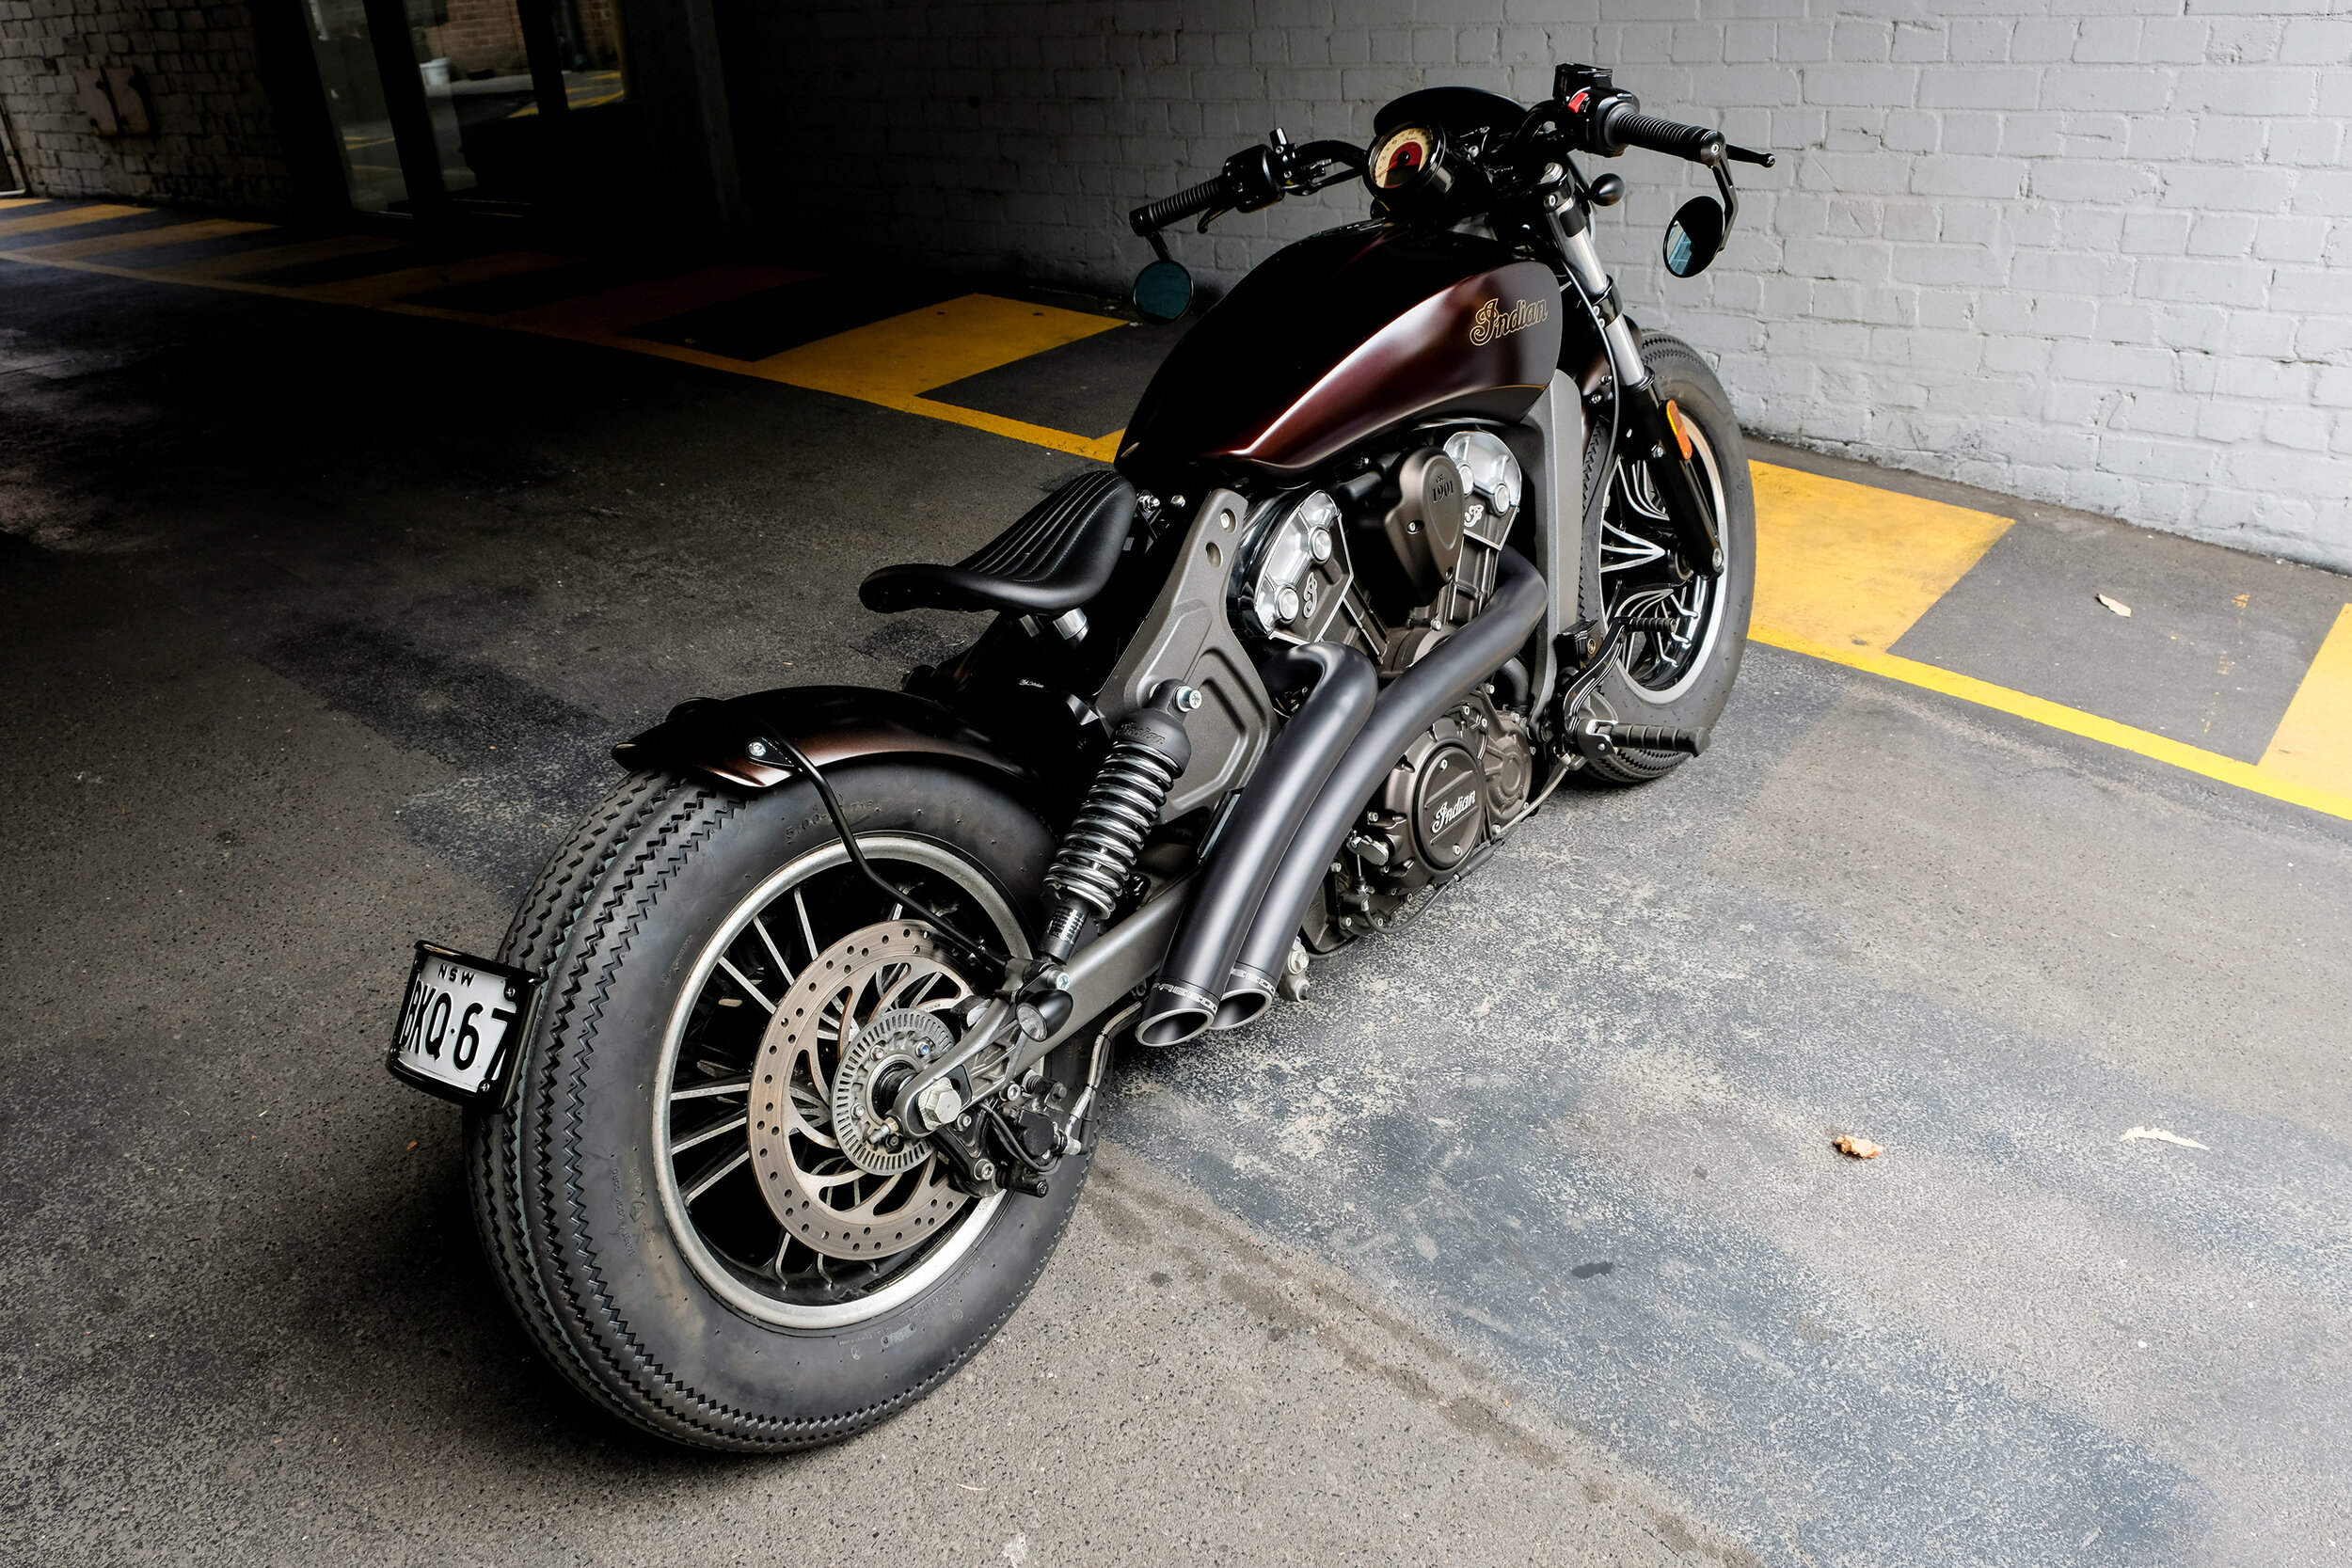 15 Indian Scout Bikes For Sale In Australia